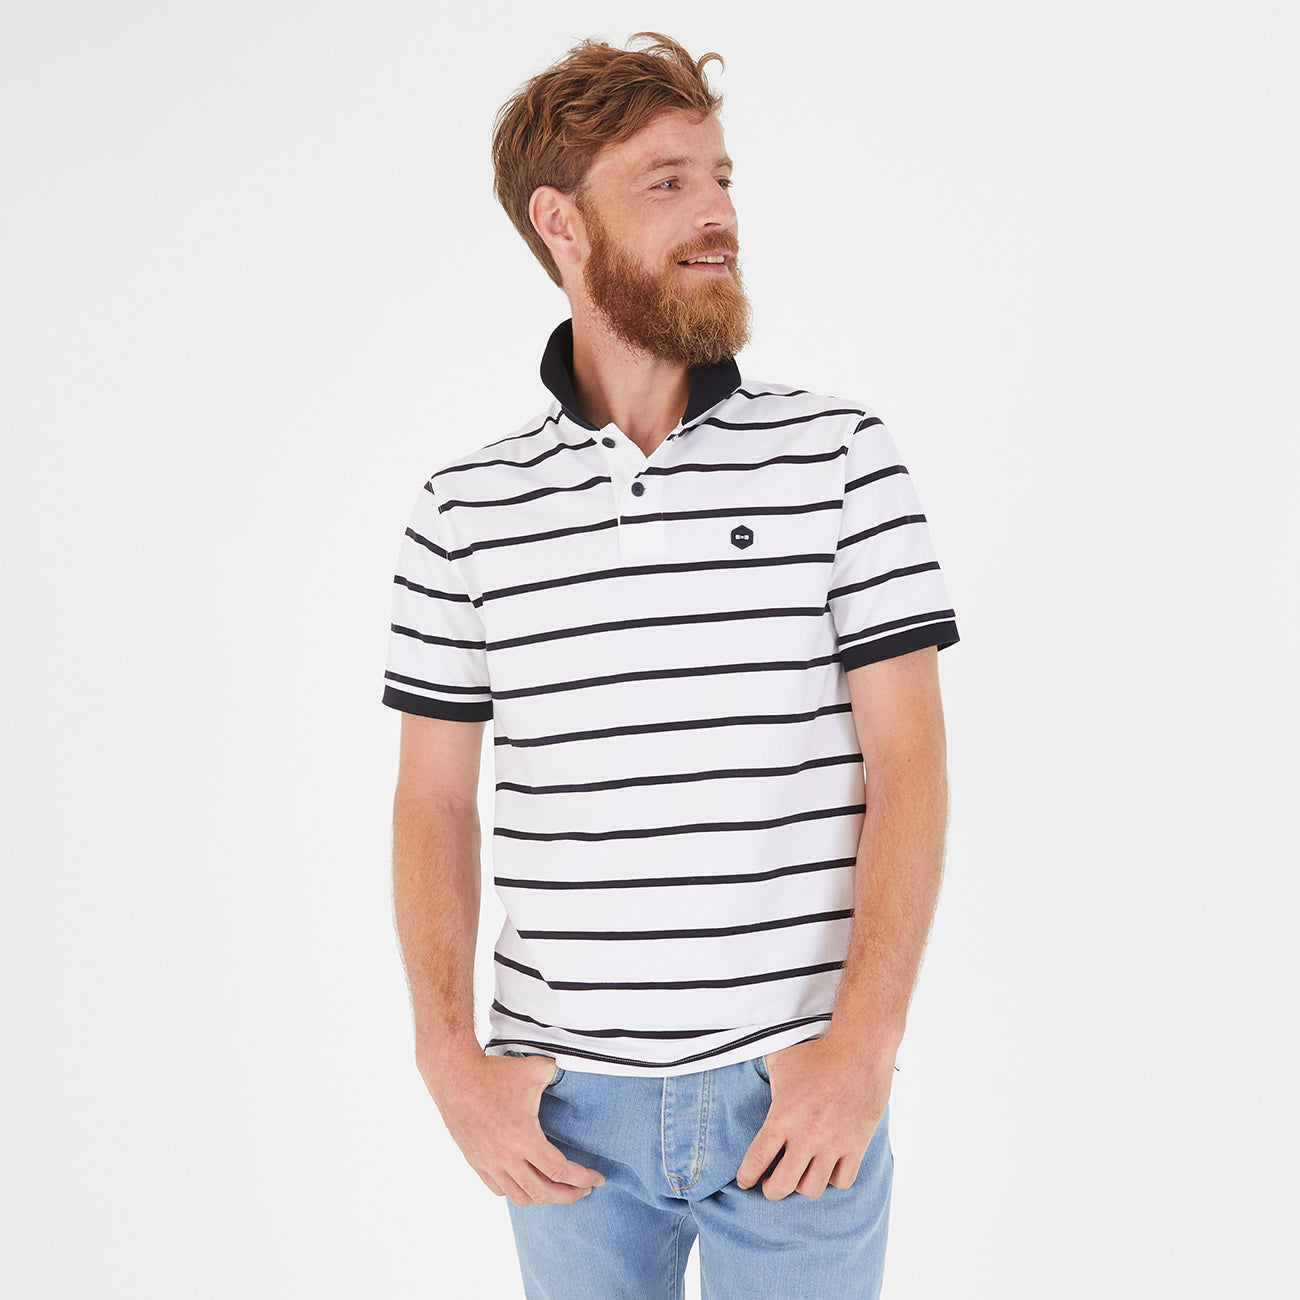 Eden Park Classic Striped Poloshirt with short sleeves and a classic collar poloshirt made from soft cotton pique. Available at StylishGuy Menswear Boutique Dublin.